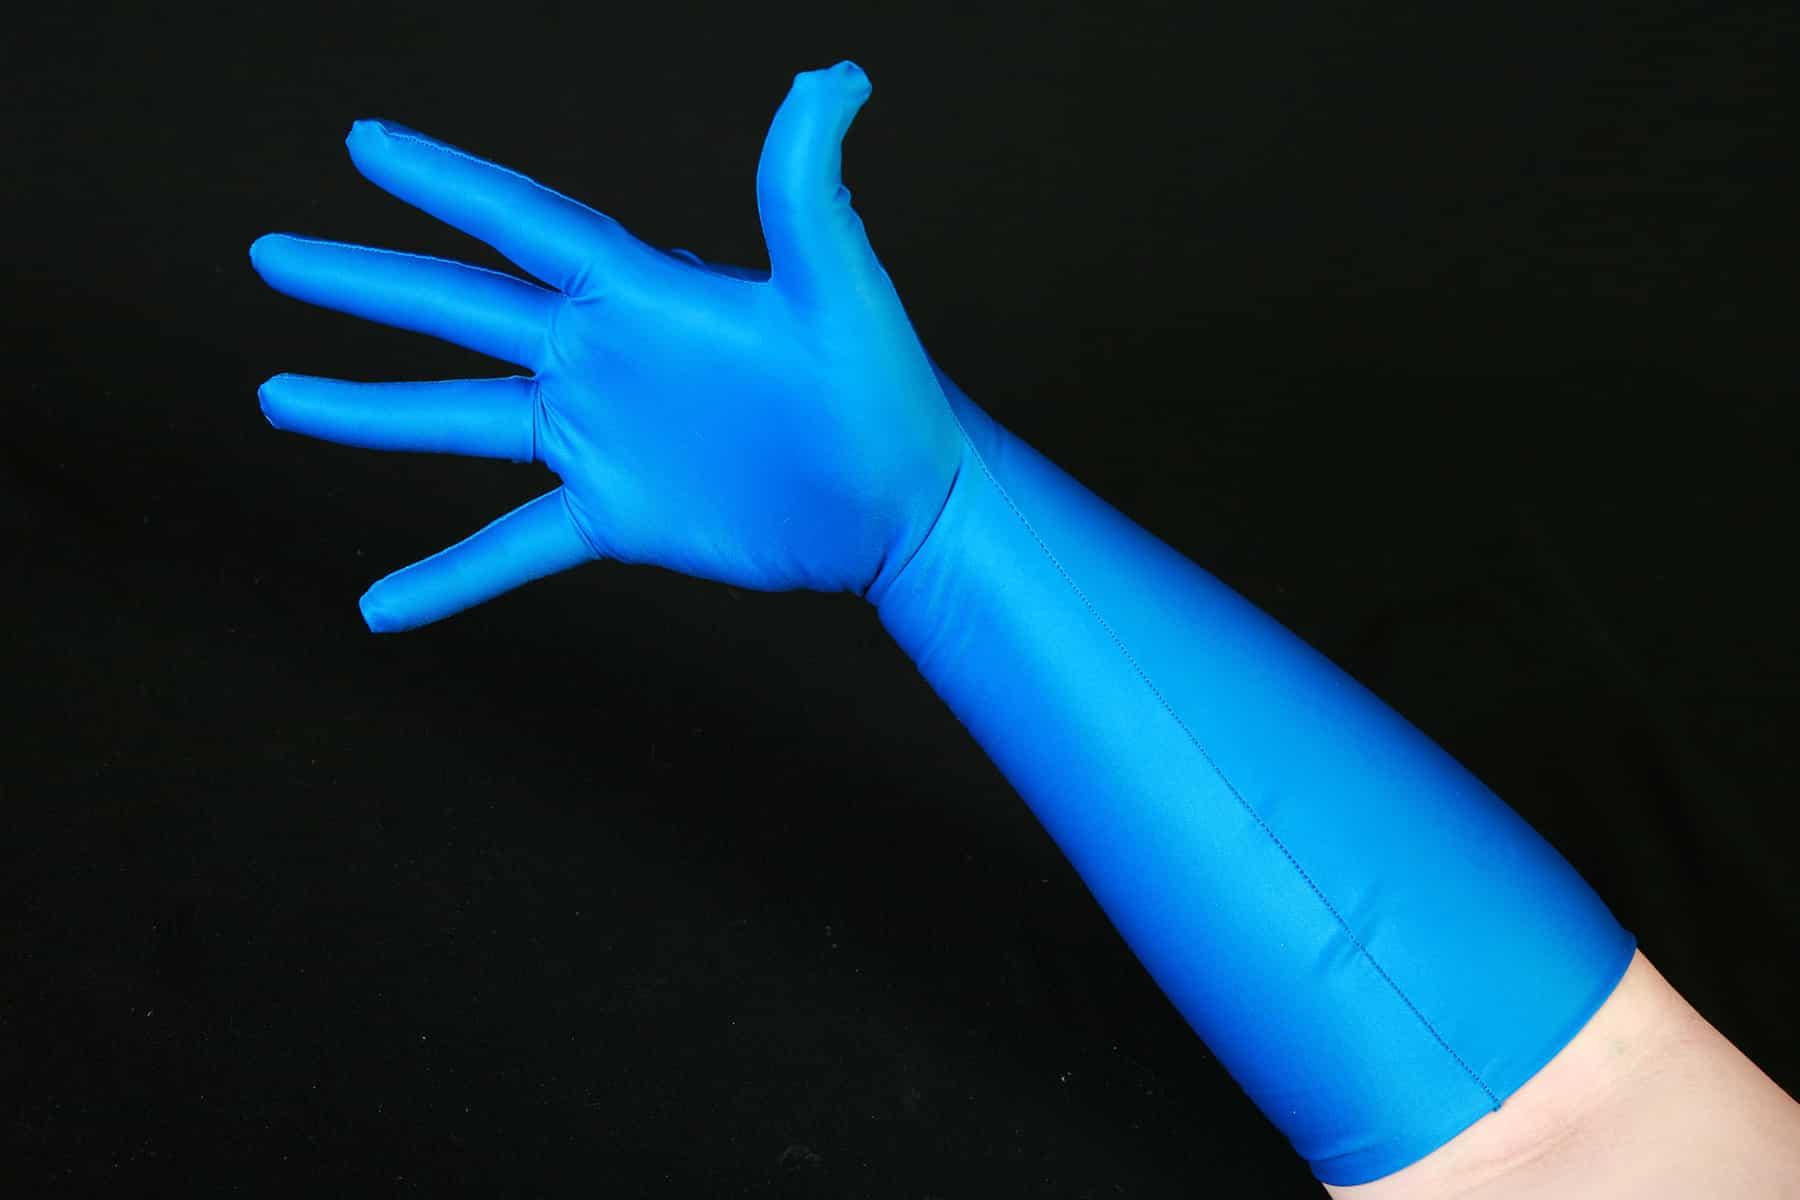 A hand wearing a blue spandex glove against a black background.